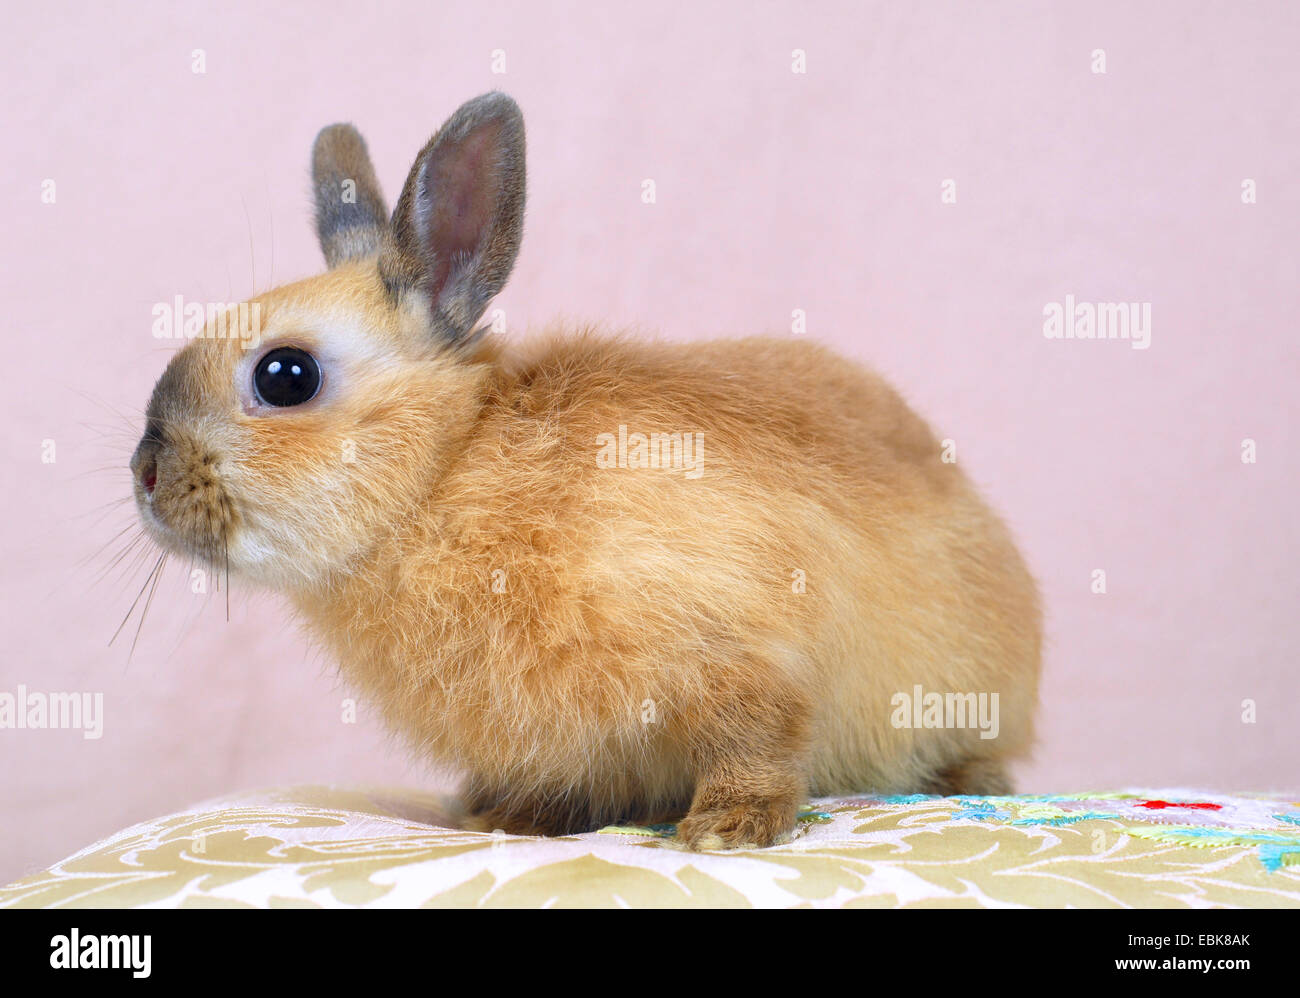 Netherland Dwarf (Oryctolagus cuniculus f. domestica), young rabbit sitting on a pillow Stock Photo